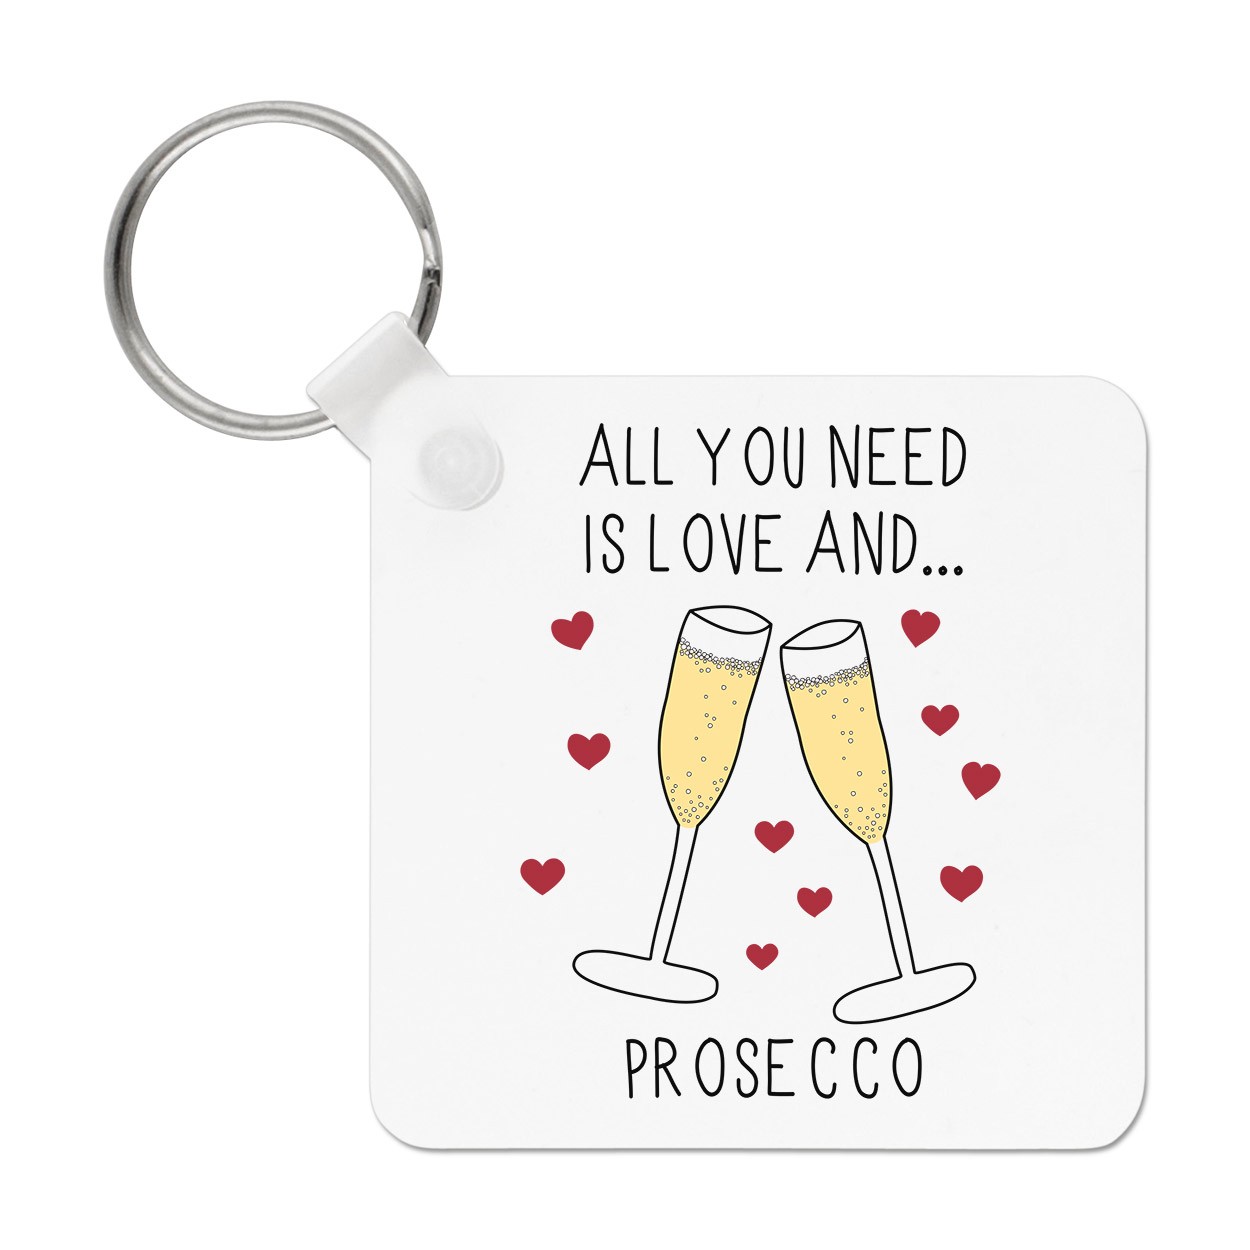 All You Need Is Love And Prosecco Keyring Key Chain